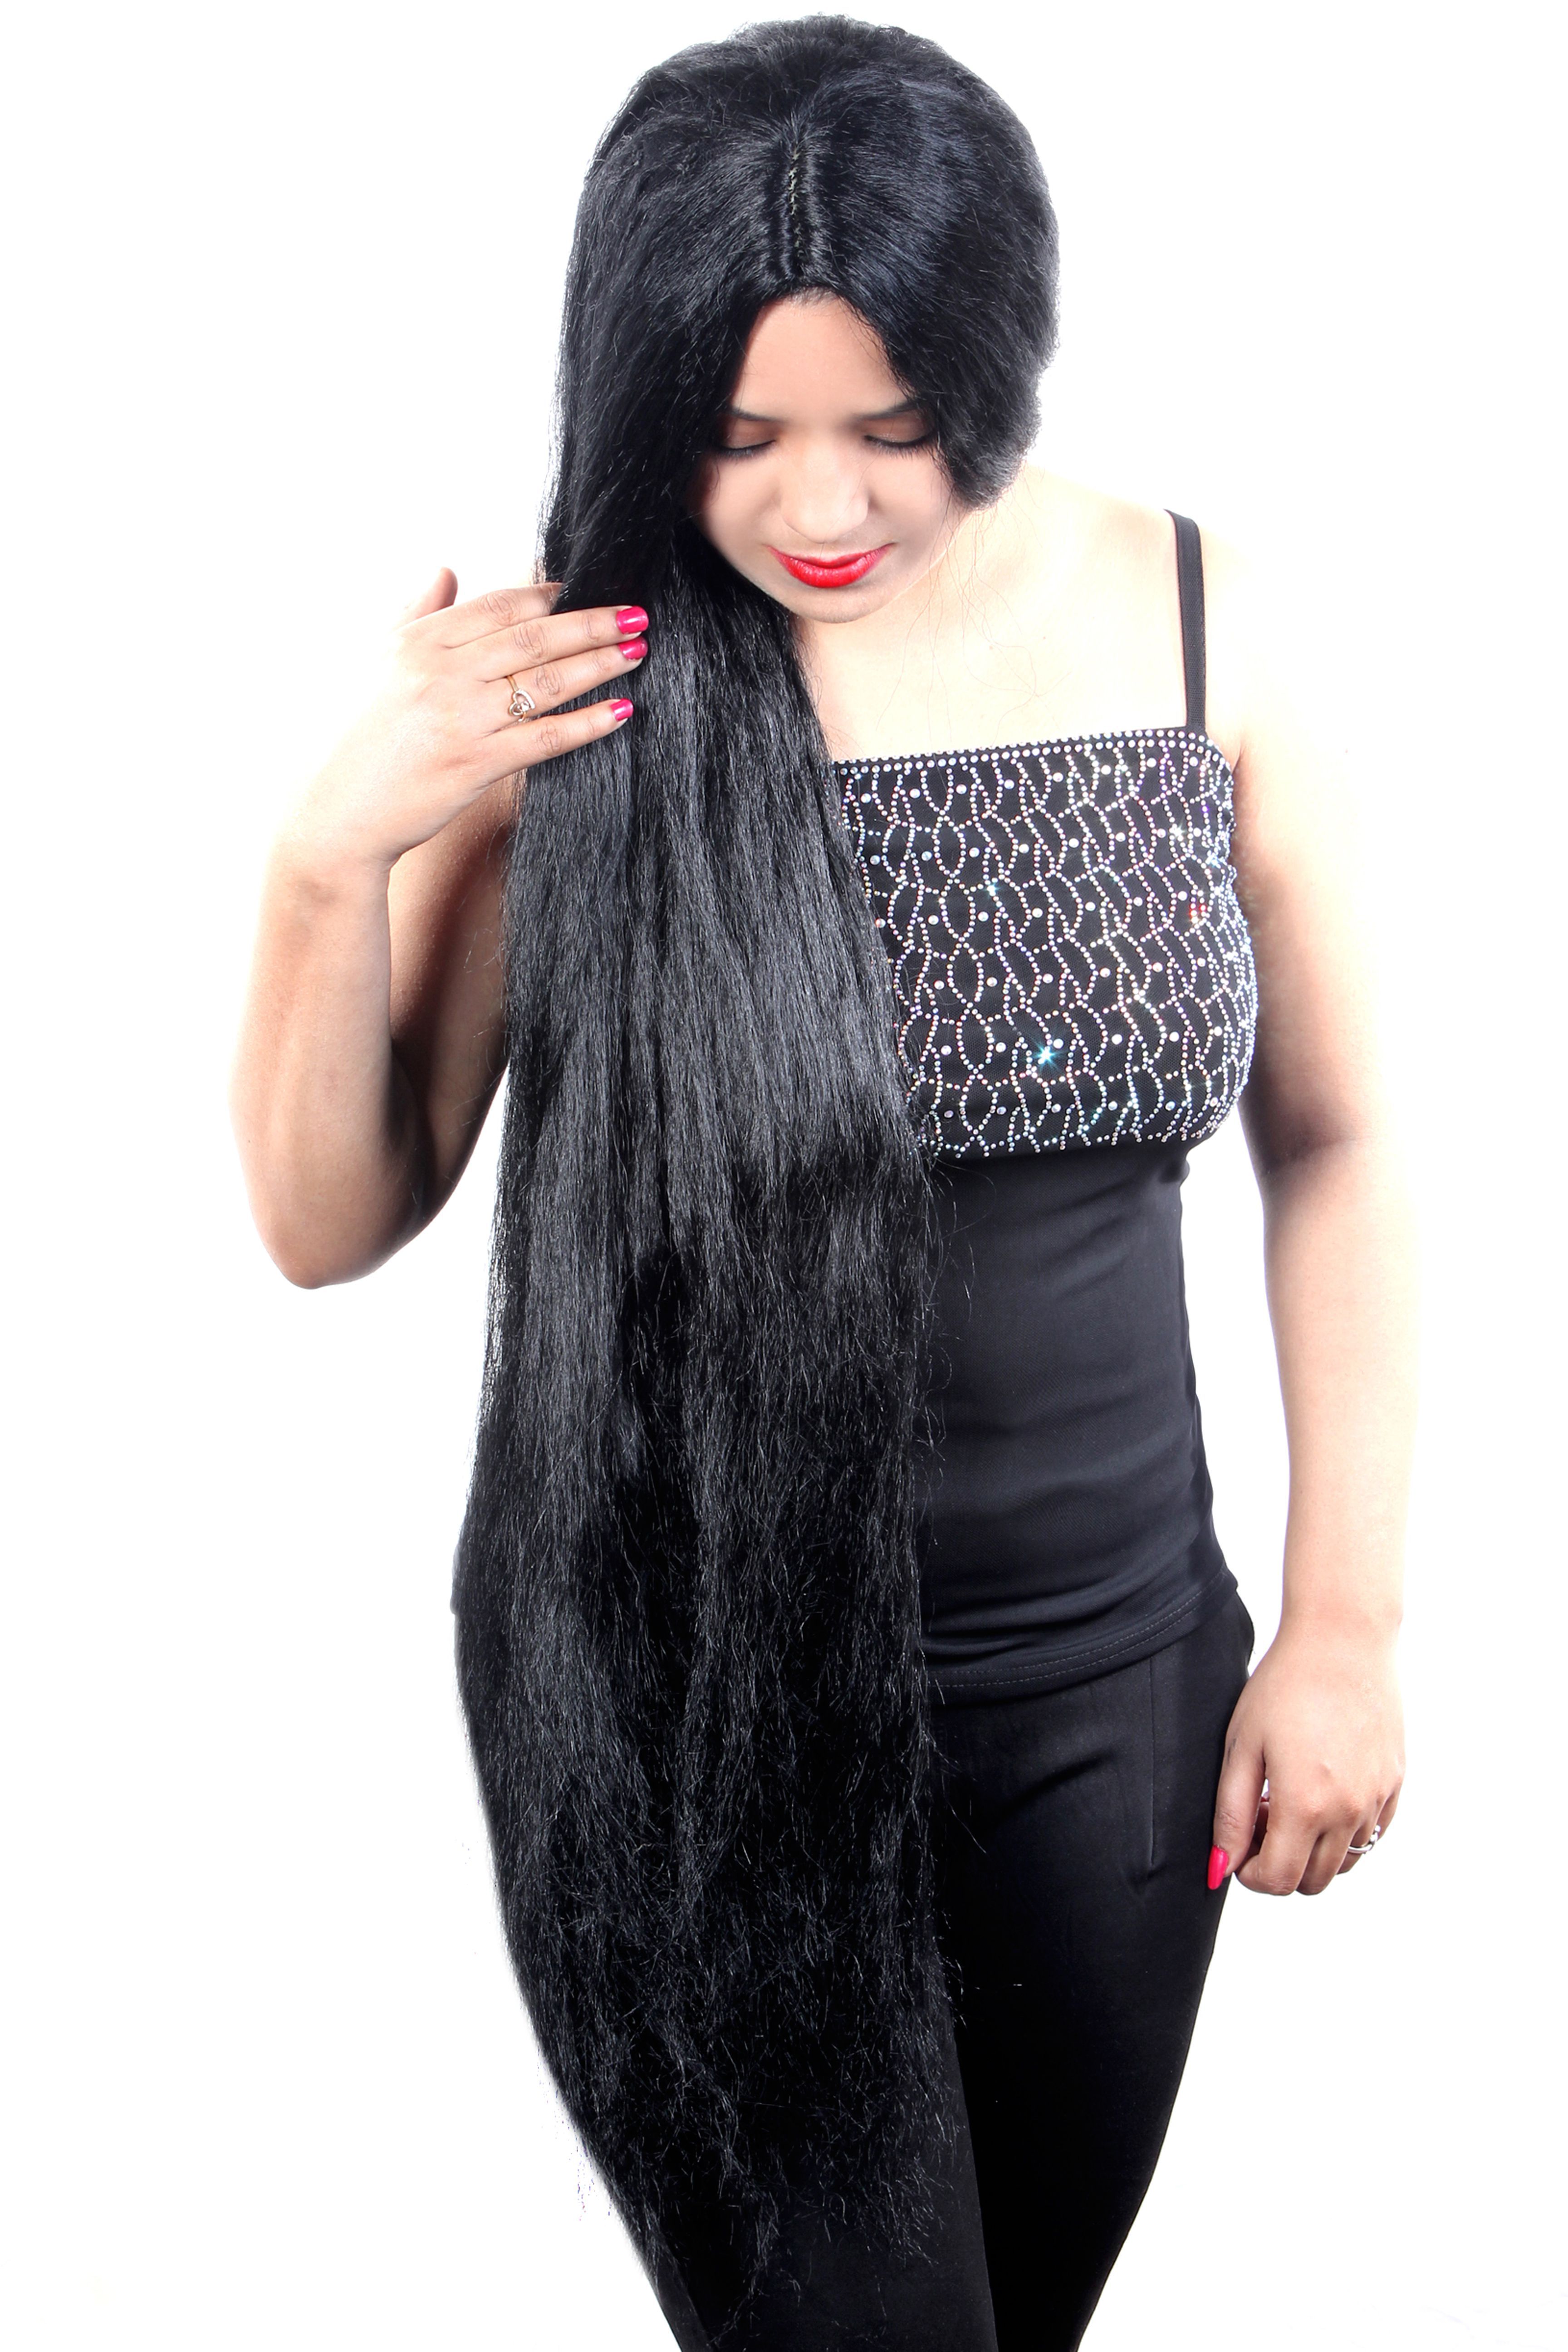 31 inch Indian Hi Long Women Black Hair wig Straight Long Indian style: Buy  Online at Low Price in India - Snapdeal